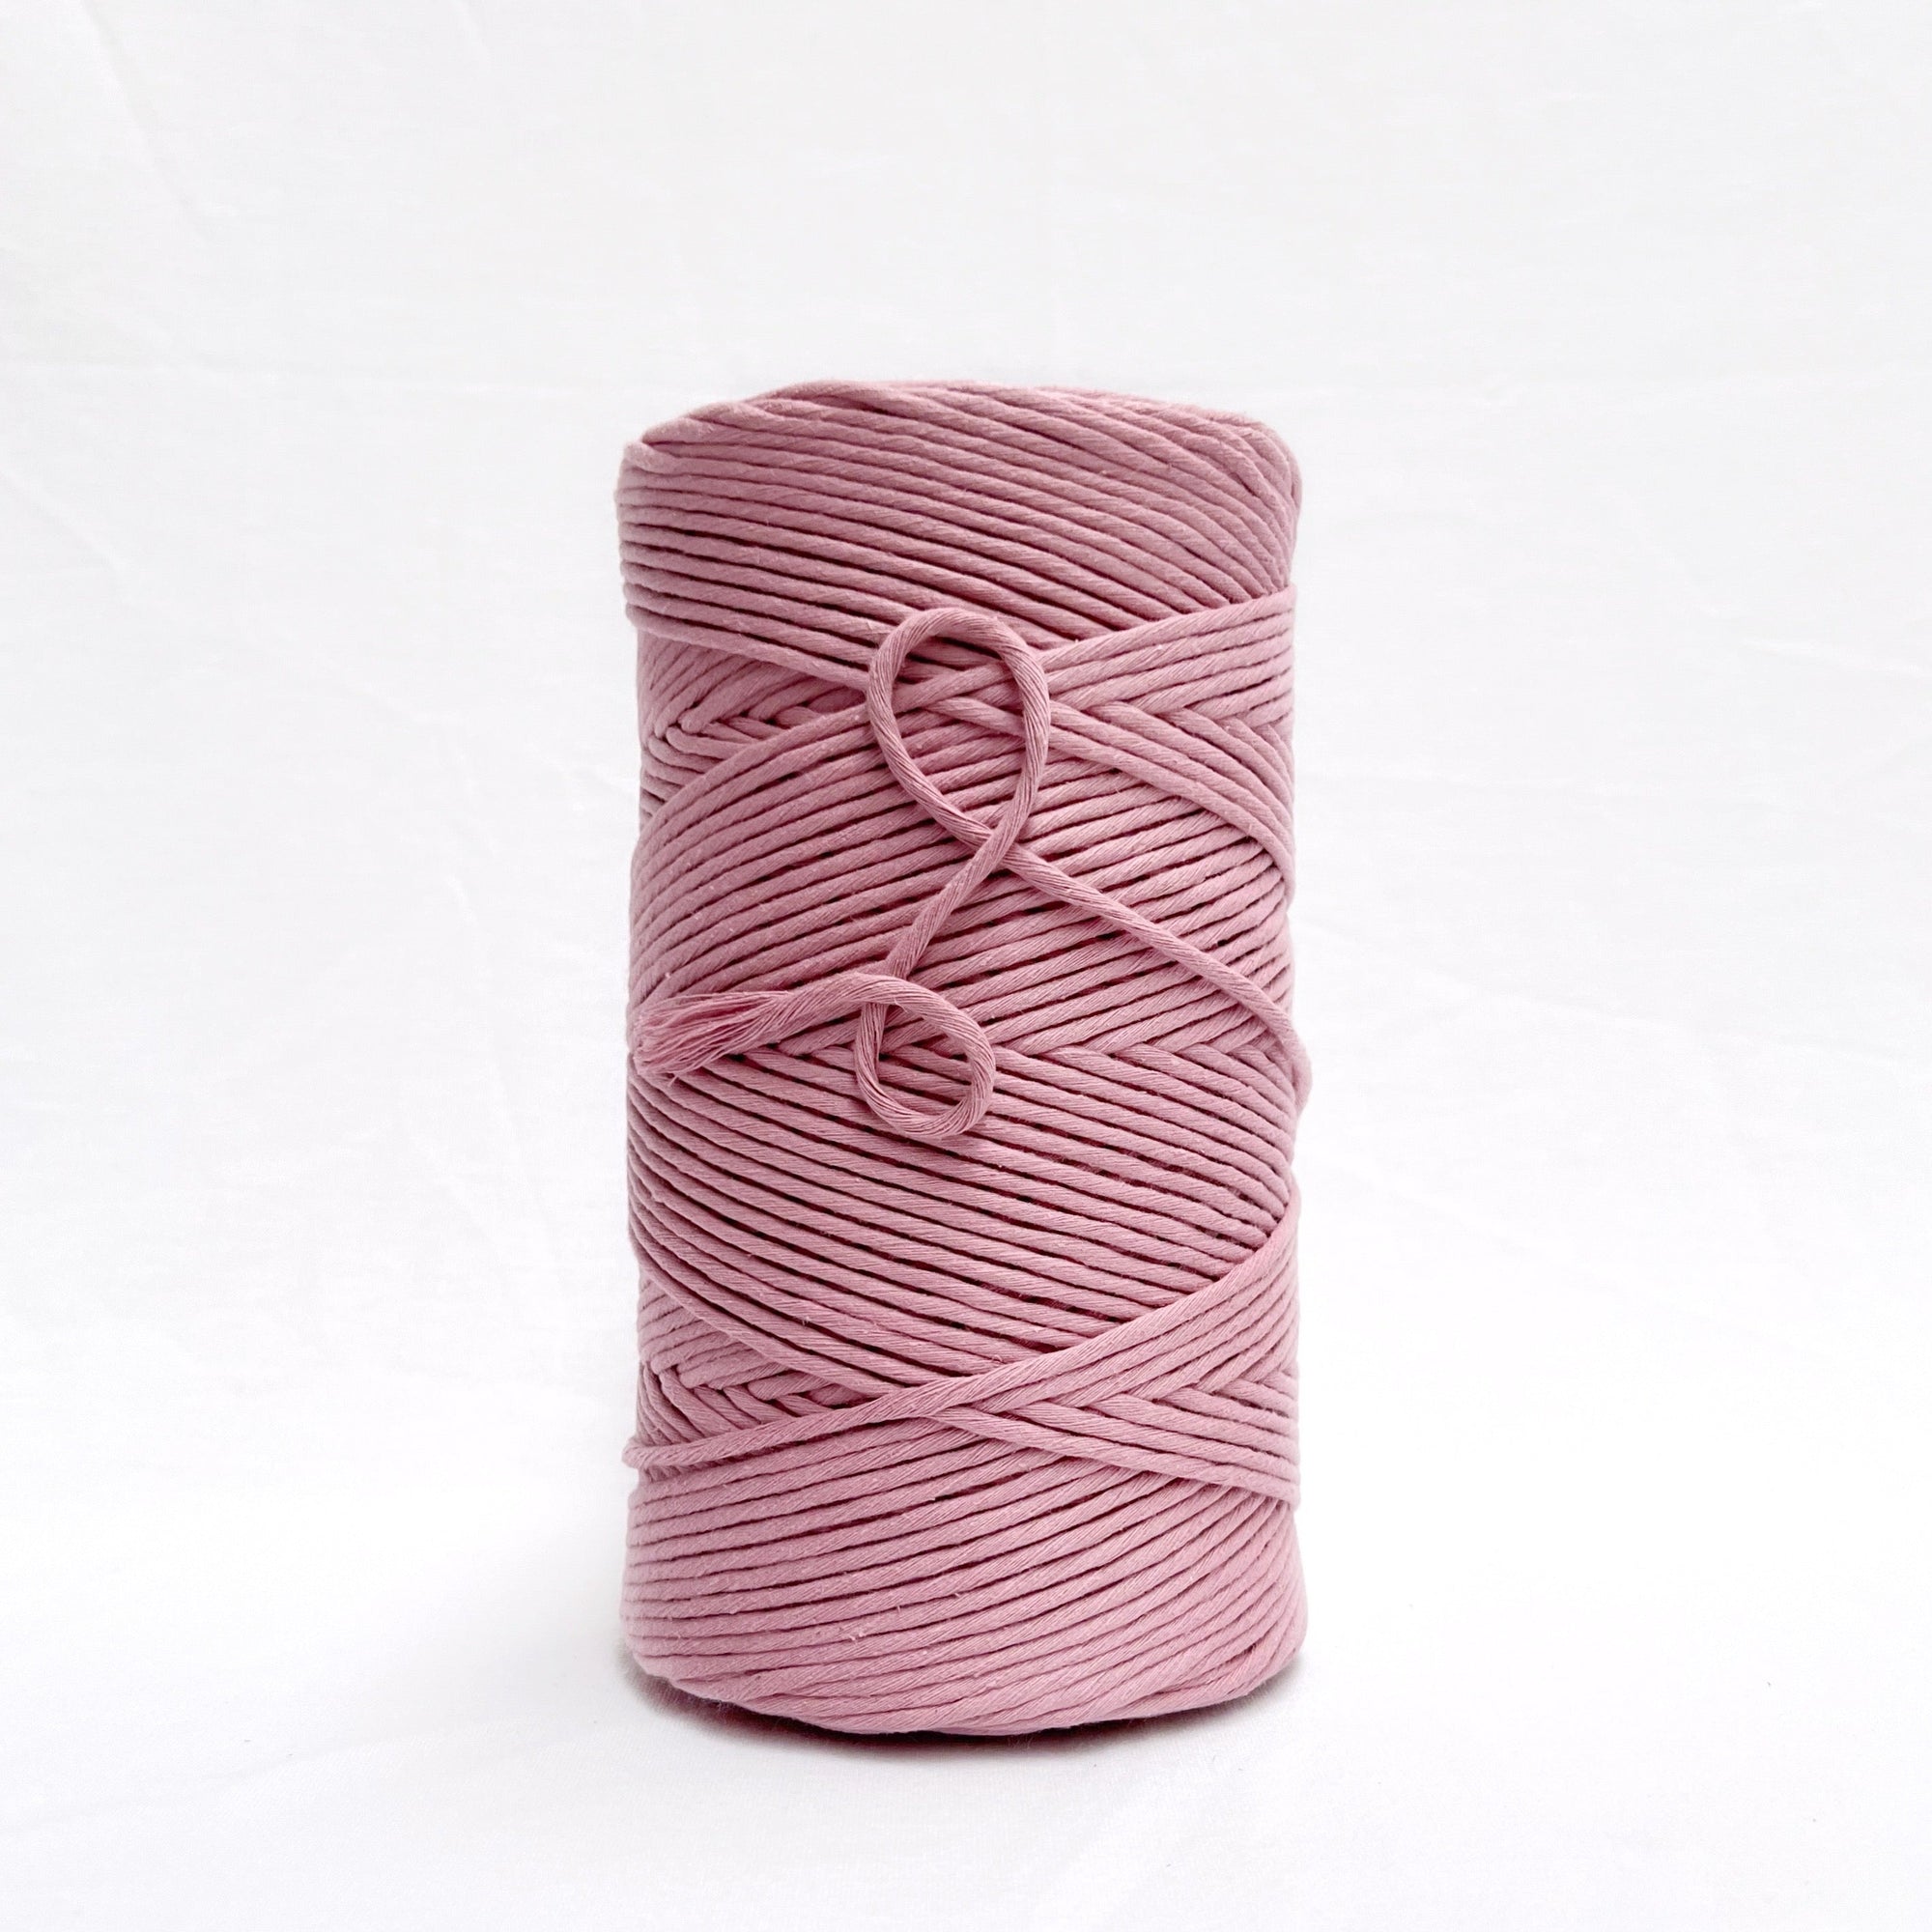 mary maker studio 1kg 5mm recycled cotton macrame string in vintage pink colour suitable for macrame workshops beginners and advanced artists